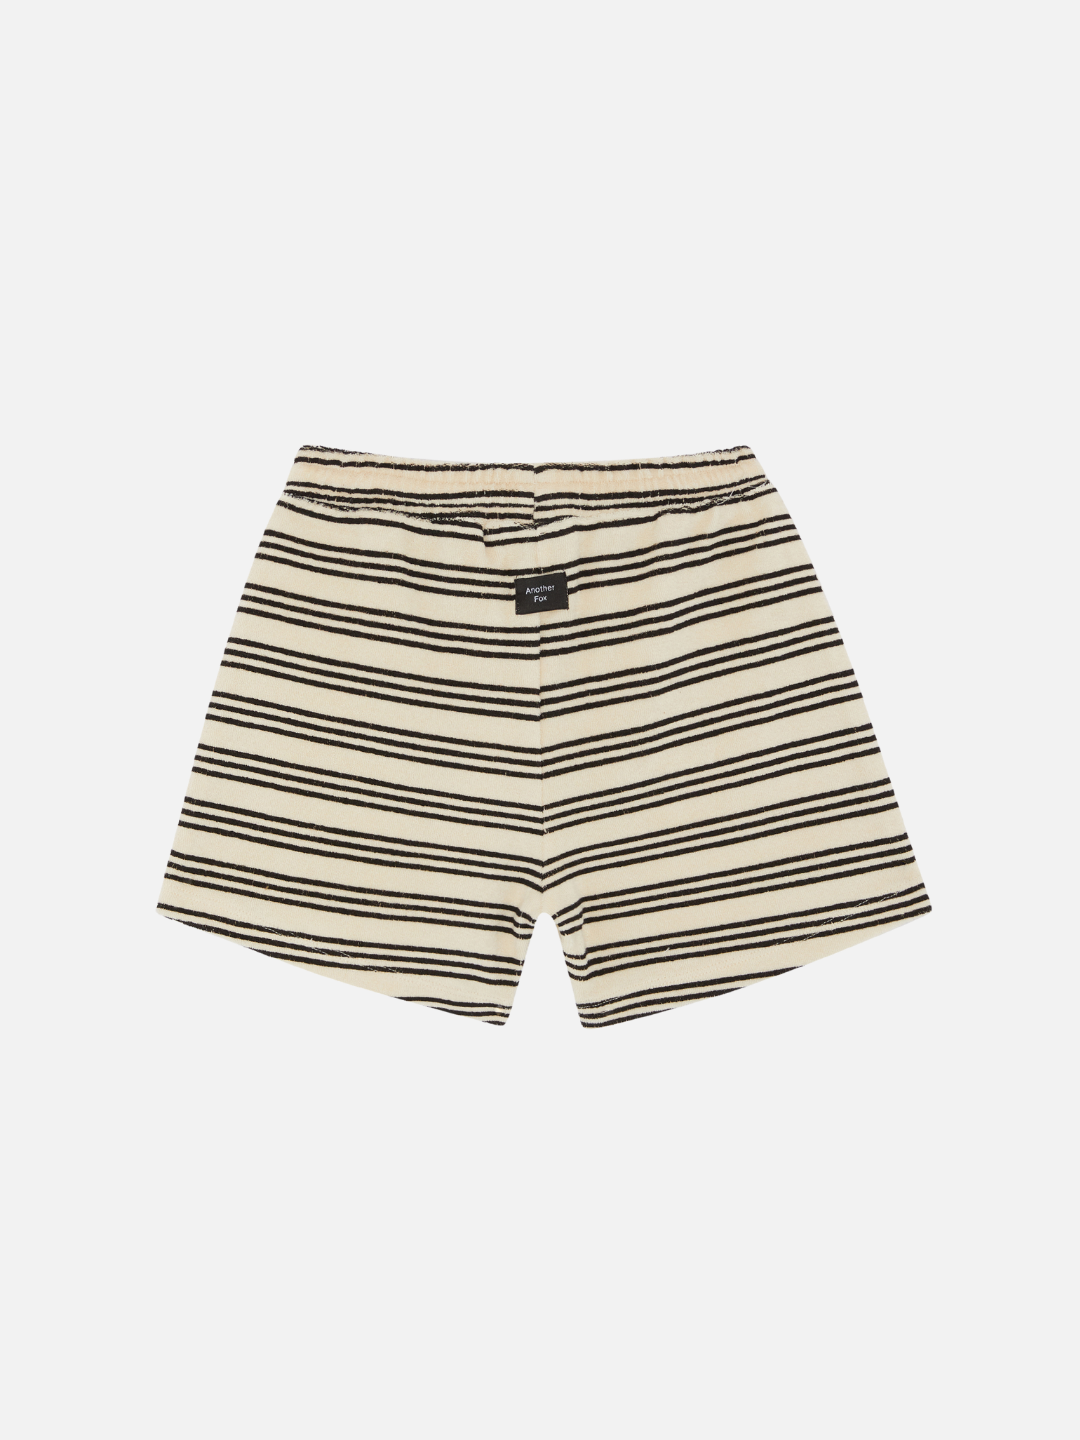 A back view of the kid's terry towel shorts in stripe